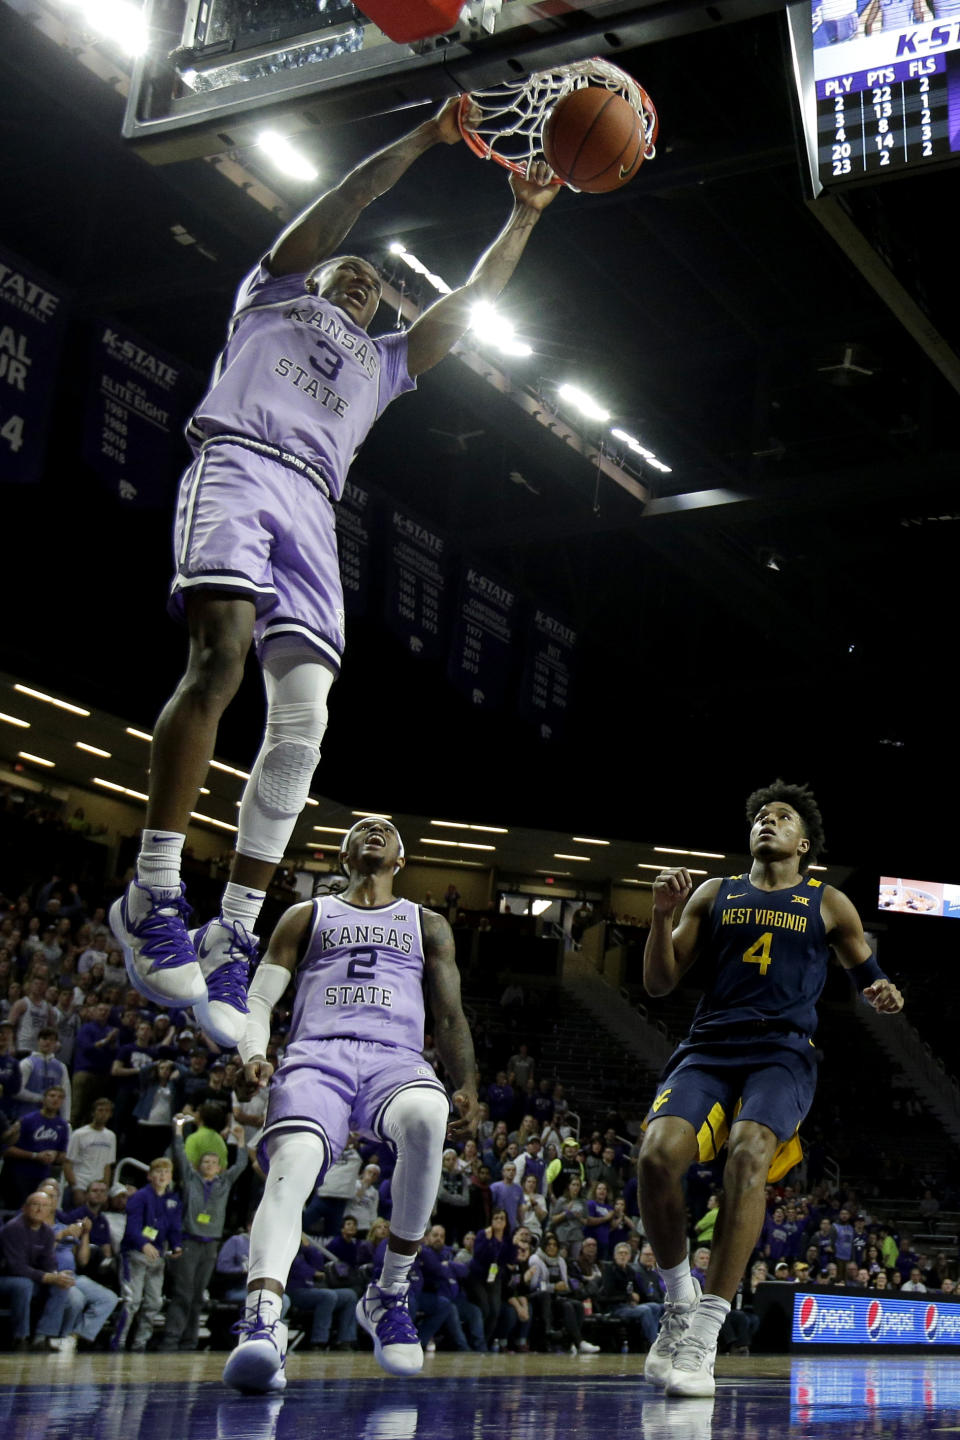 Kansas State's DaJuan Gordon dunks the ball during the second half of an NCAA college basketball game against West Virginia Saturday, Jan. 18, 2020 in Lawrence, Kan. Kansas State won 84-68. (AP Photo/Charlie Riedel)